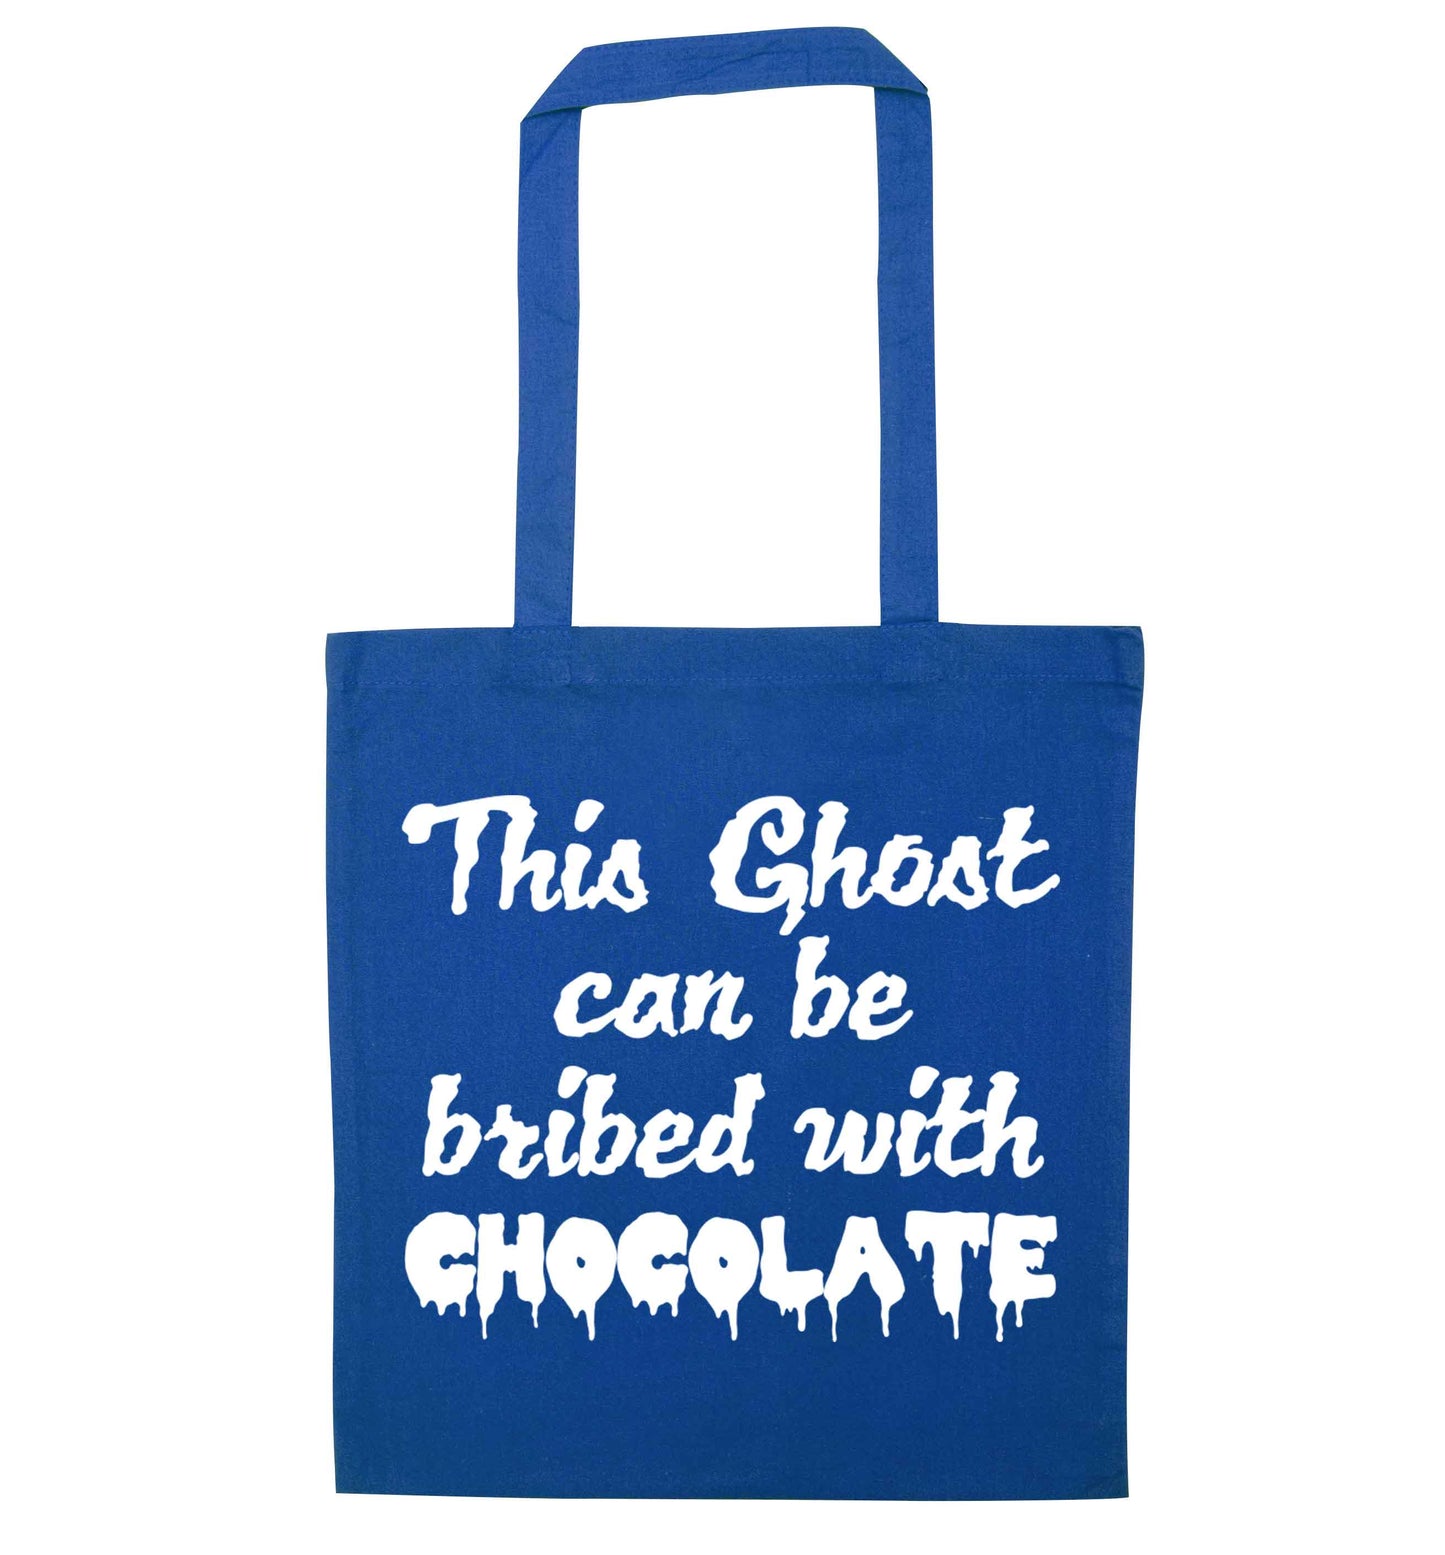 This ghost can be bribed with chocolate blue tote bag